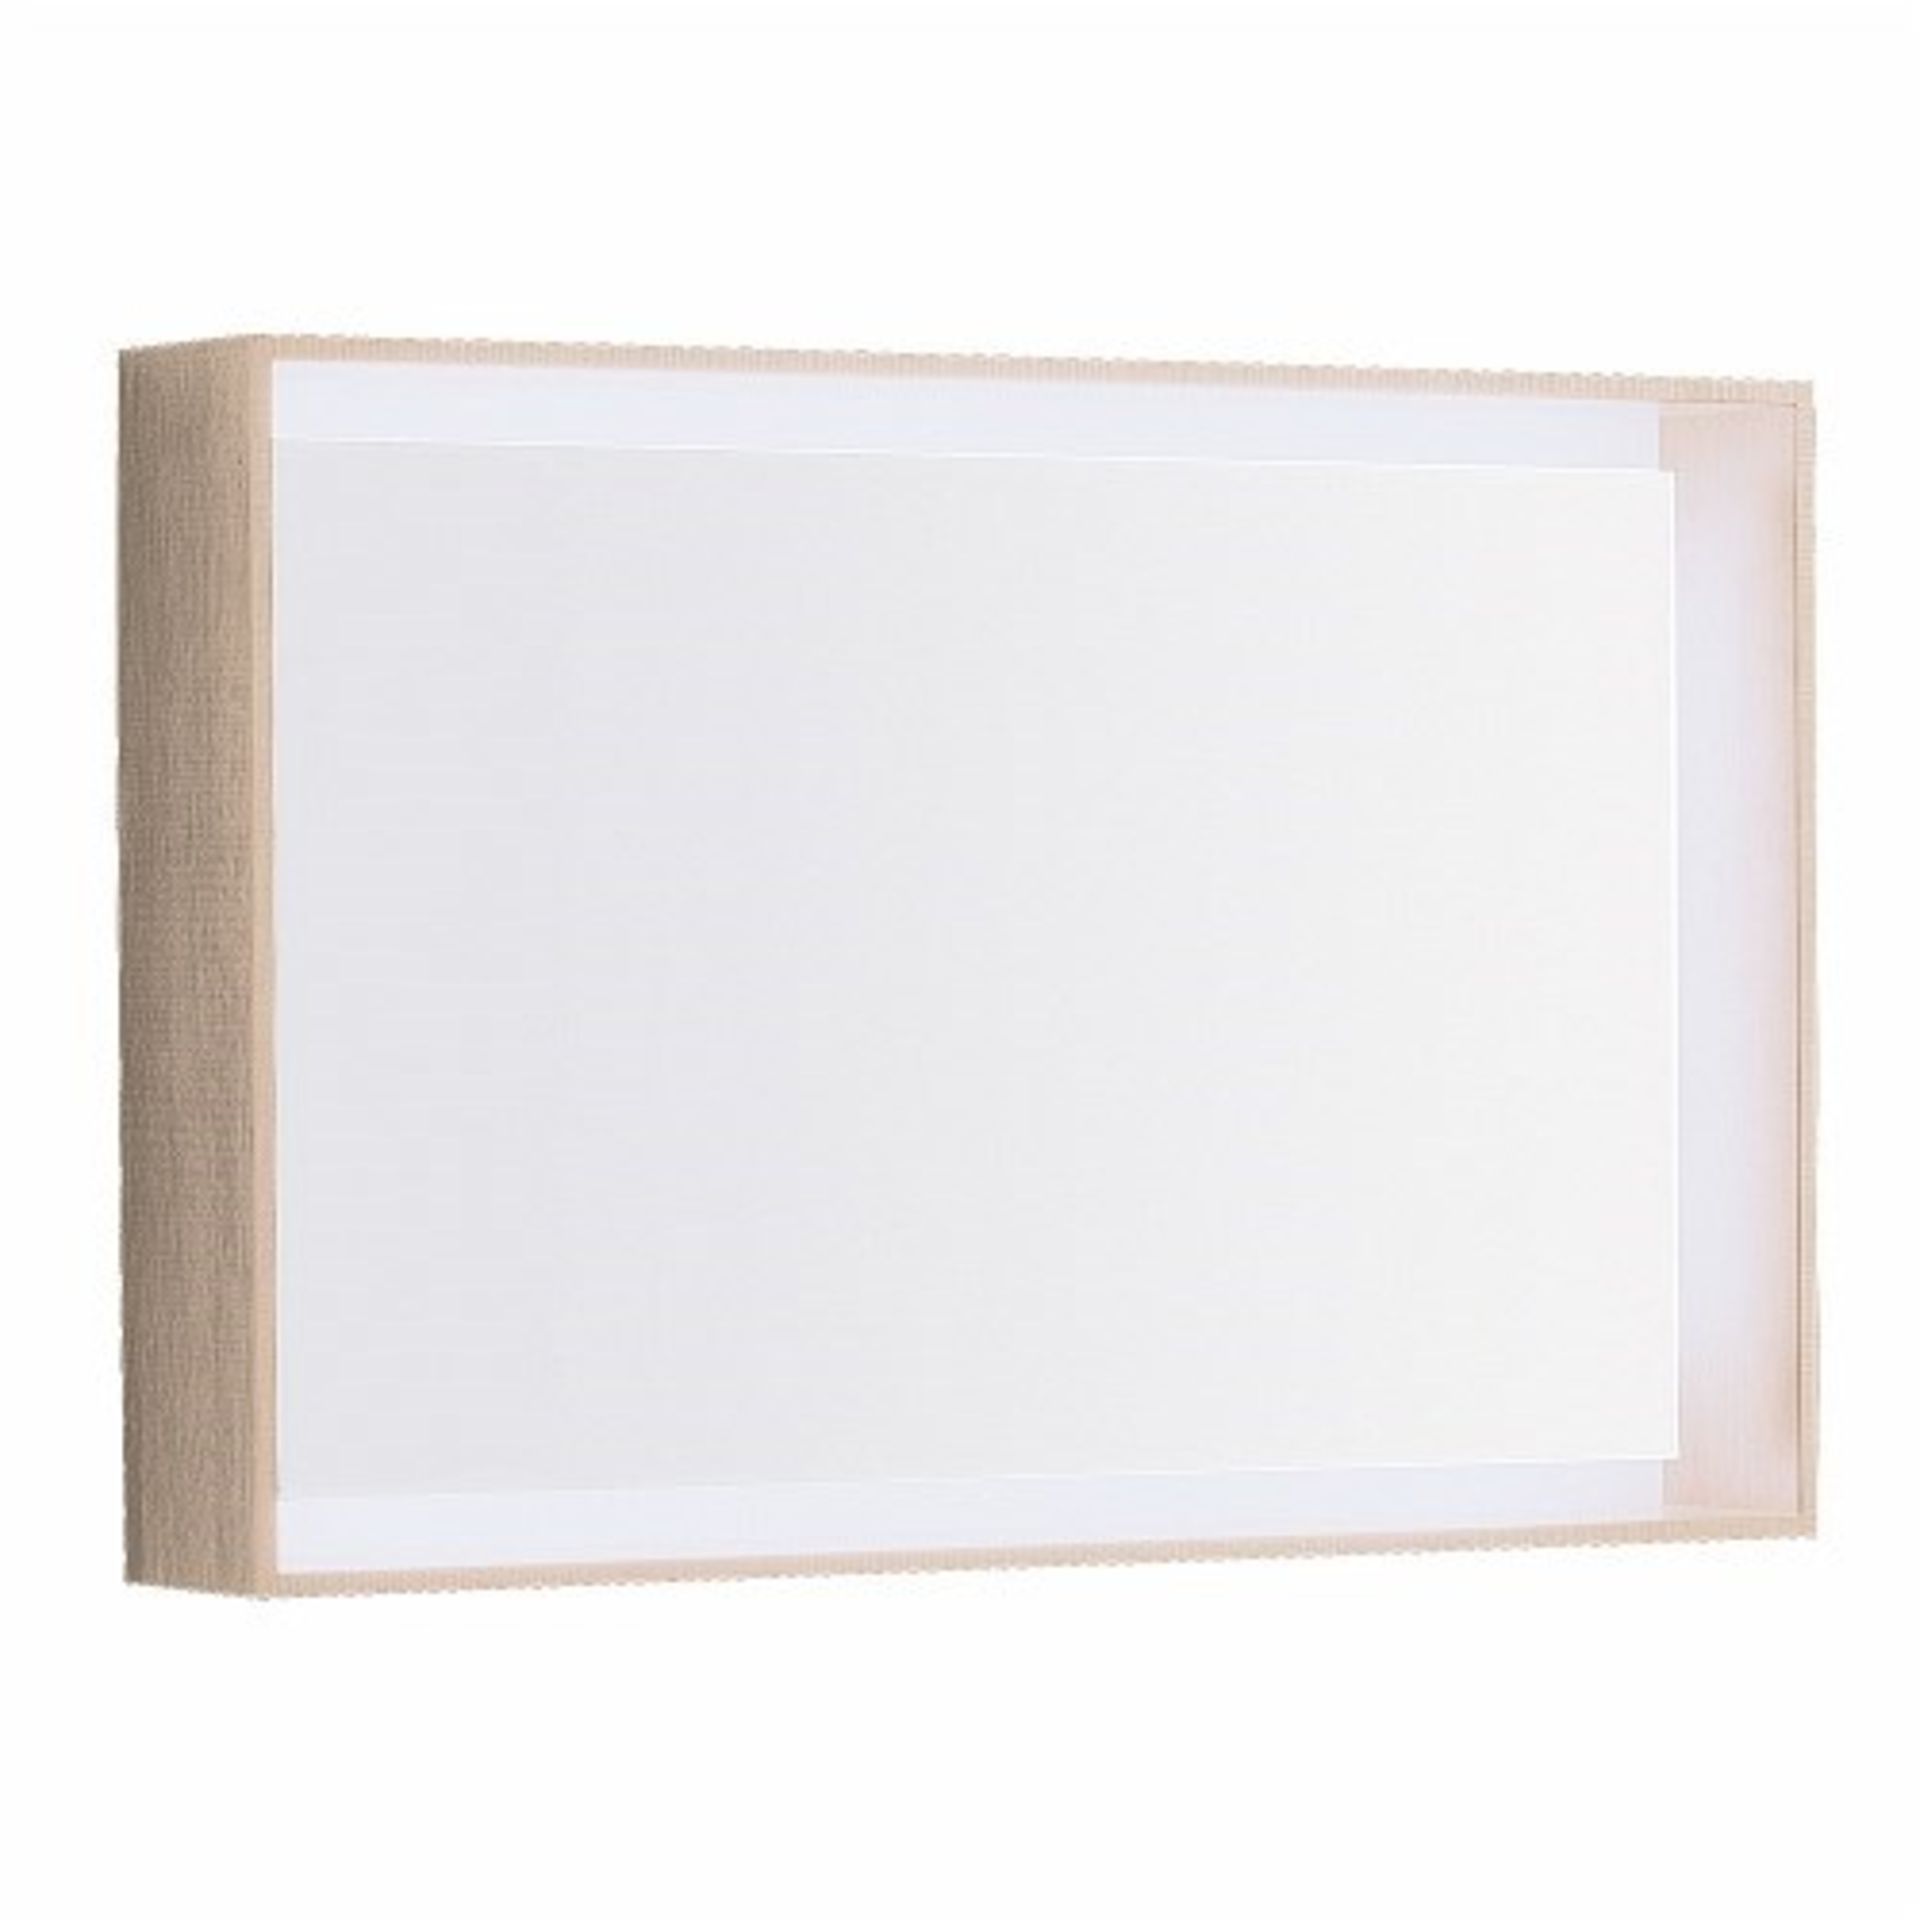 (SA26) Geberit Citterio 1184x584mm Natural Beige illuminated Mirror.RRP £687.99.If youre looki... - Image 3 of 3